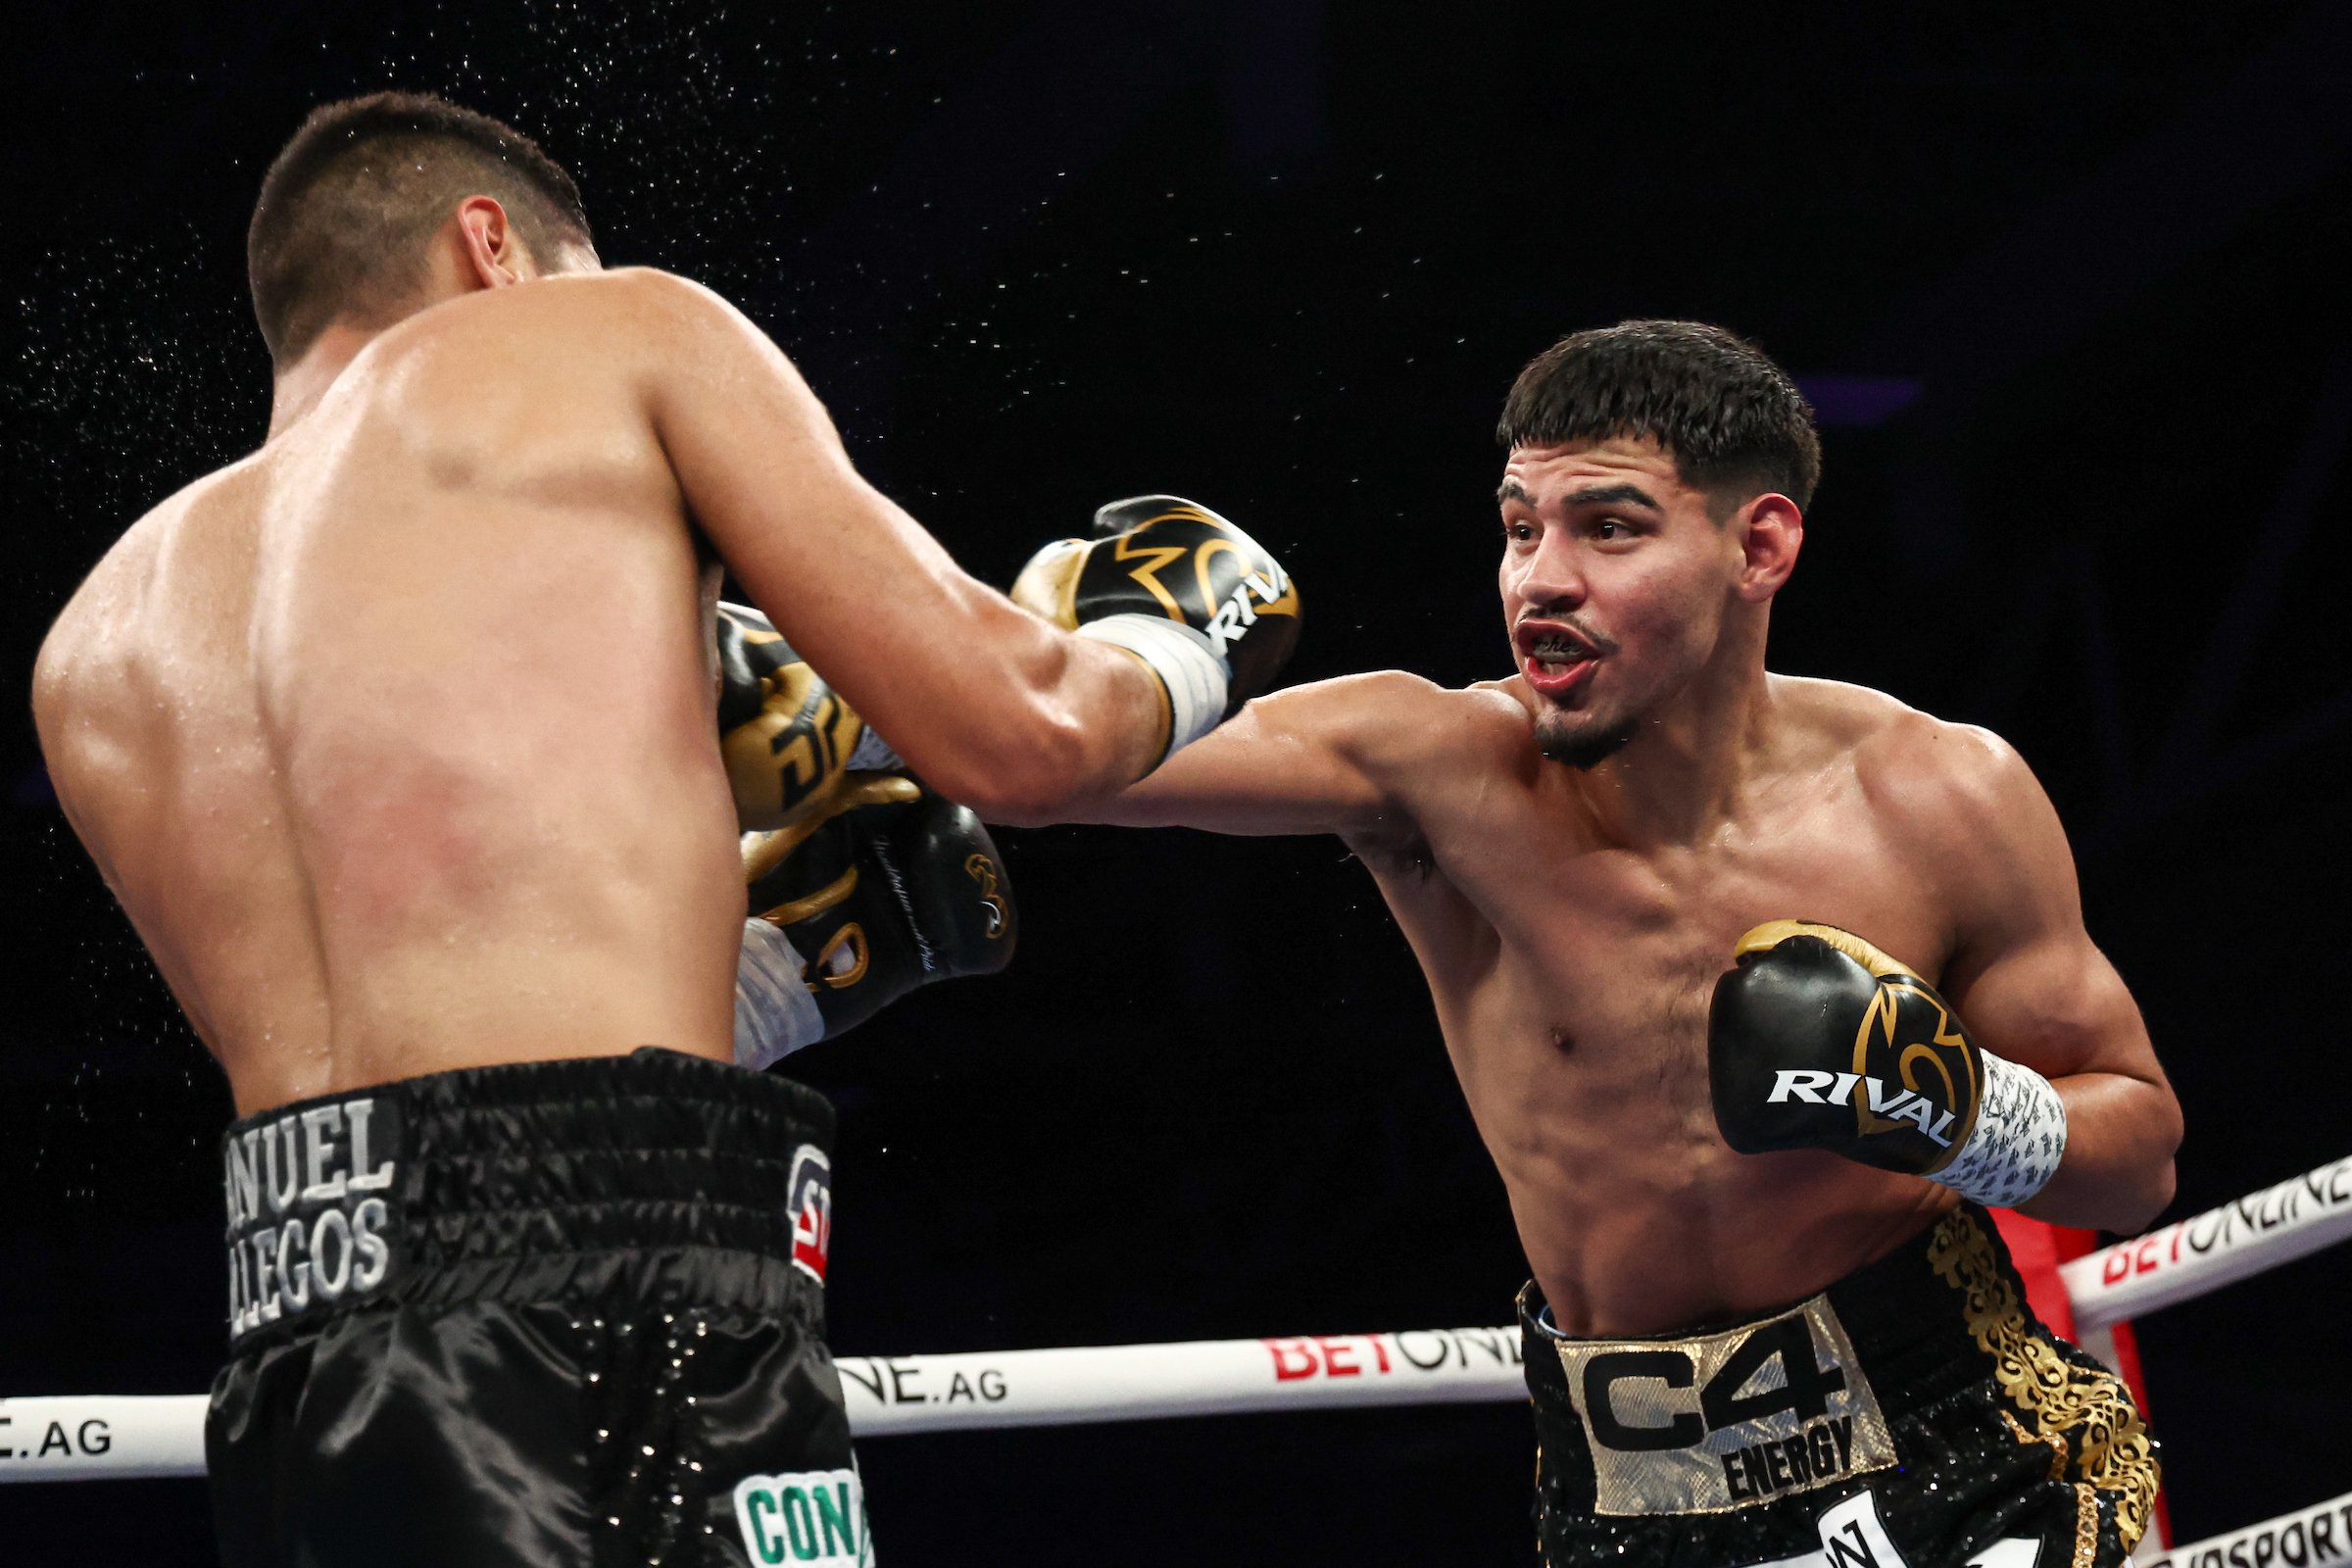 Diego Pacheco to face Shawn McCalman in battle of unbeatens on April 6